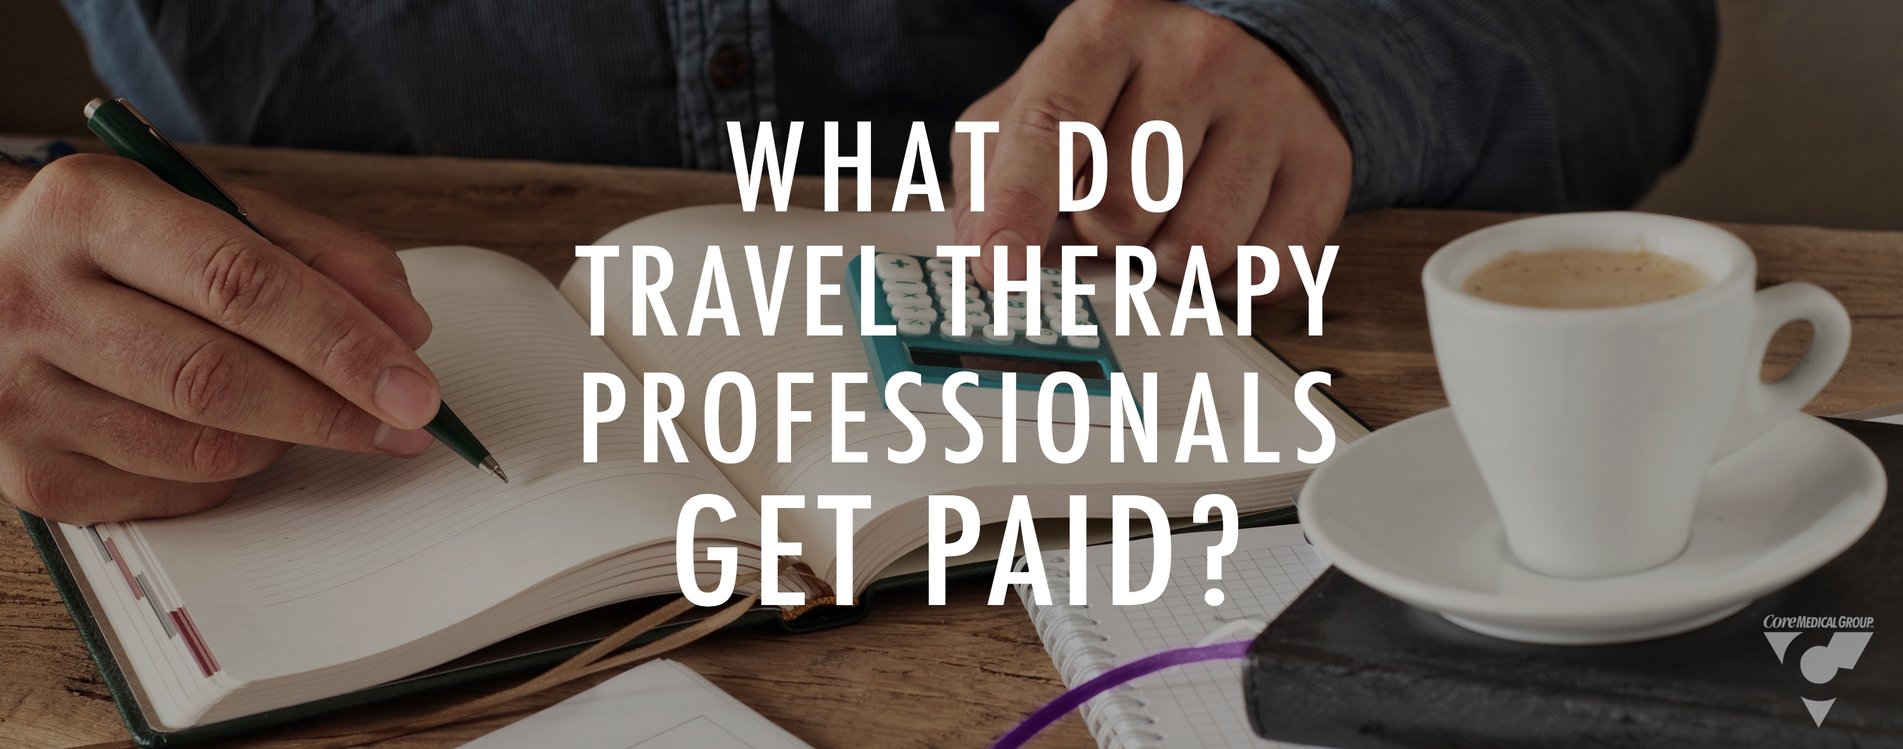 CMG Blog - What Do Travel Therapy Professionals Get Paid